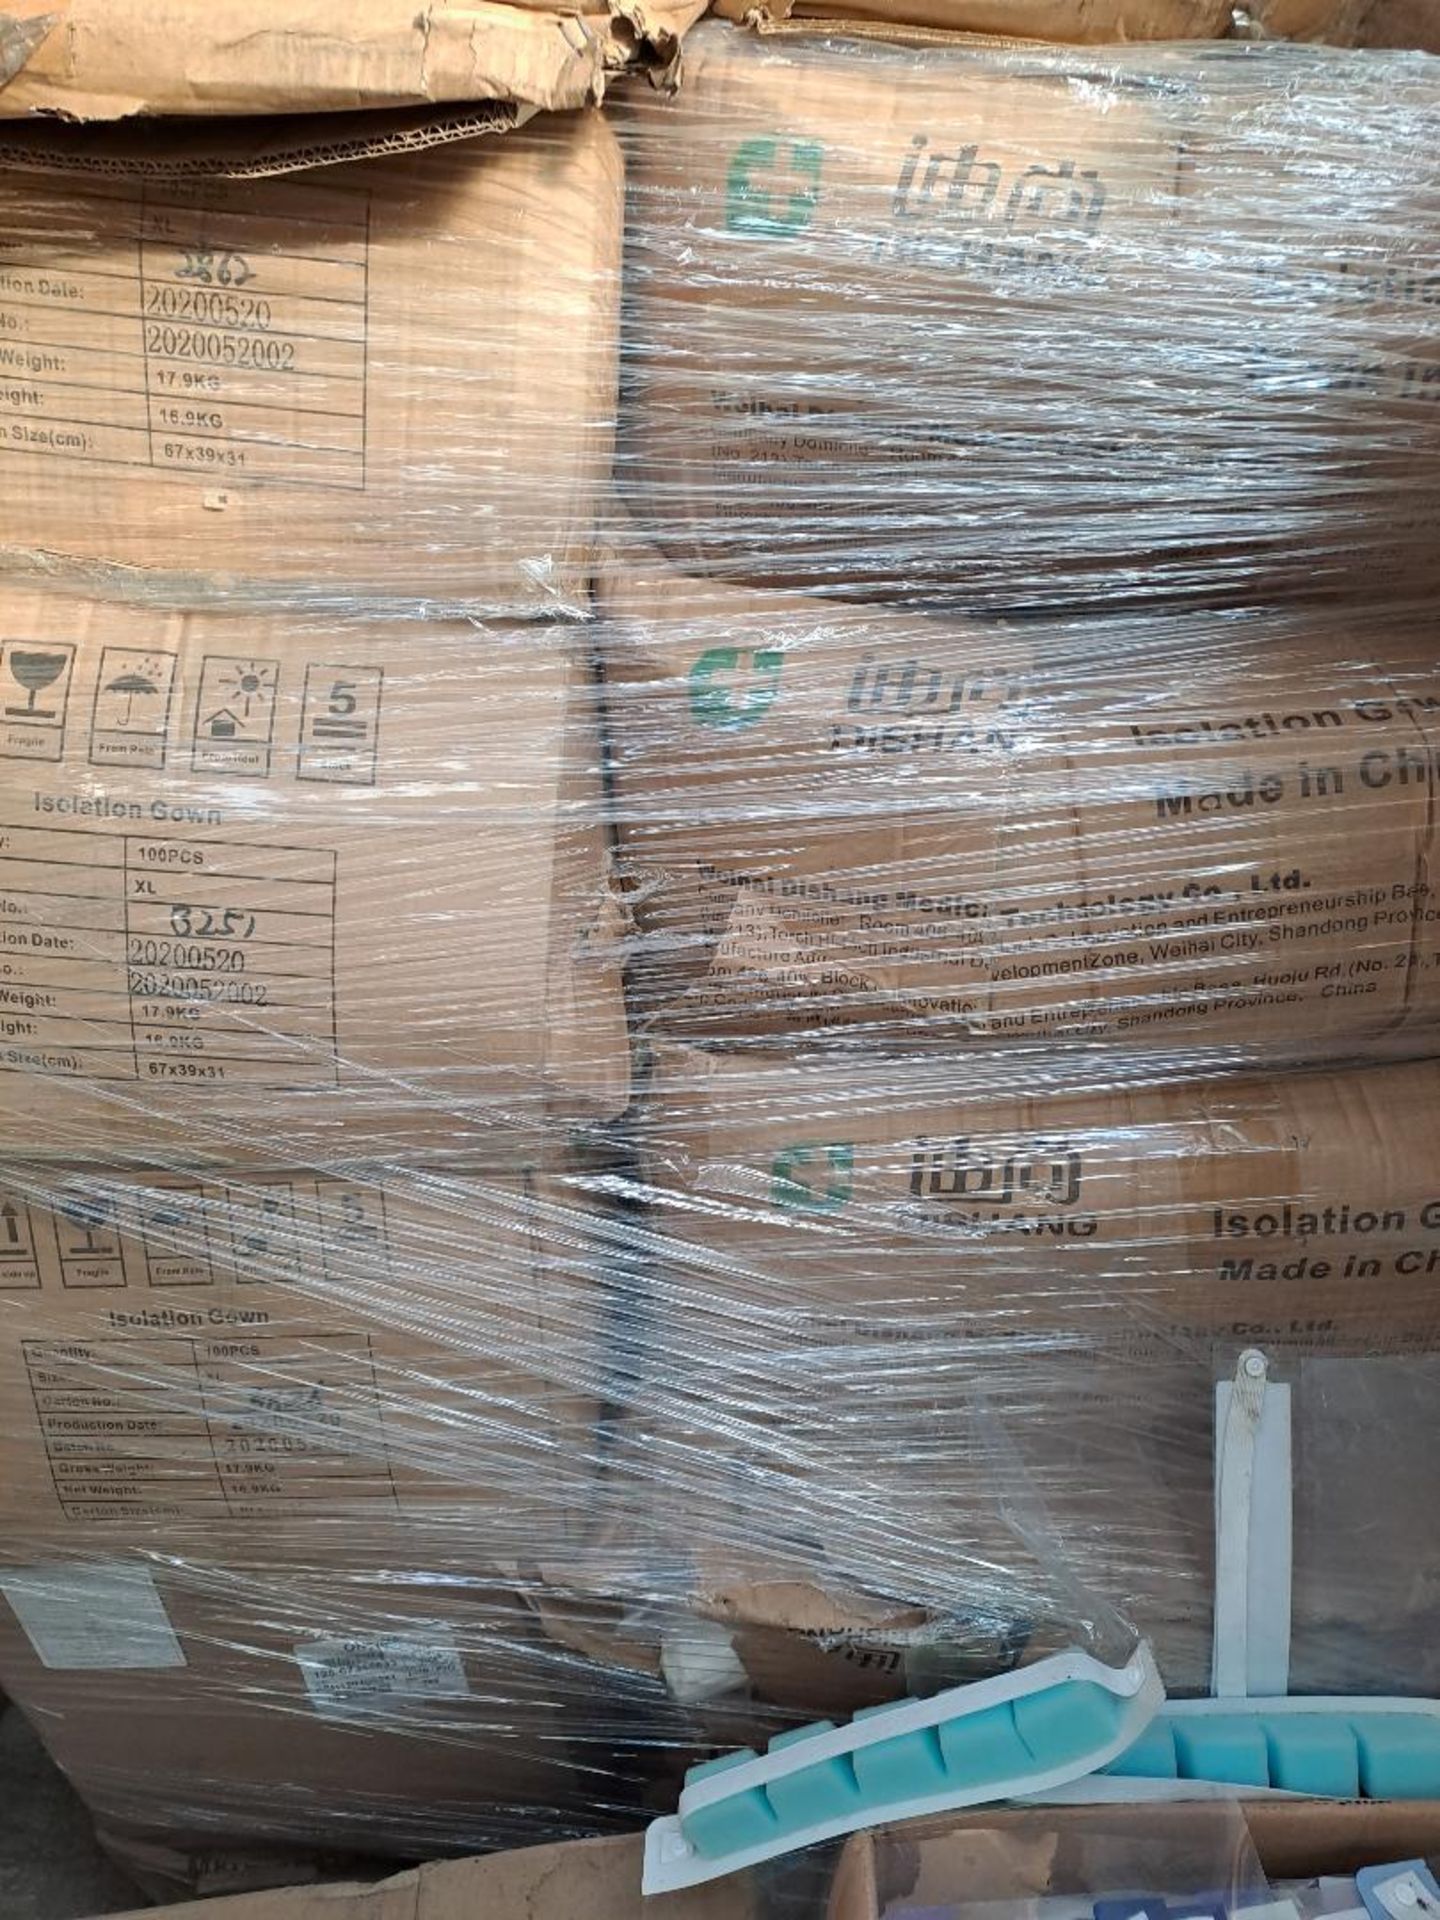 9 X FULL PALLETS OF HOSPITAL GOWNS - MIXED PALLETS - Image 6 of 9